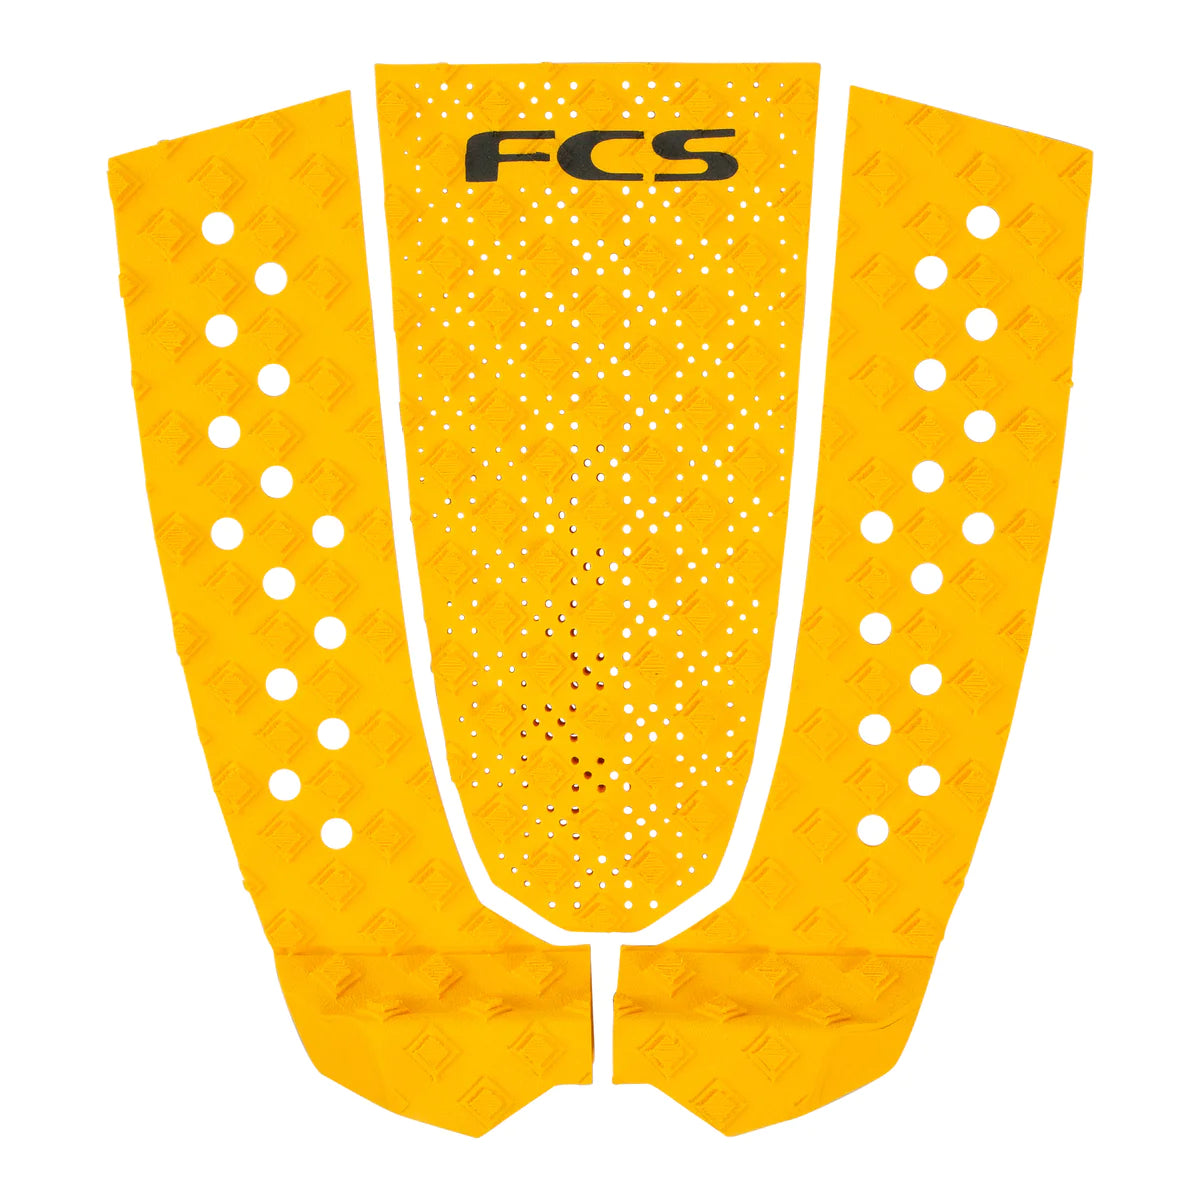 FCS T-3 Eco Traction Grip